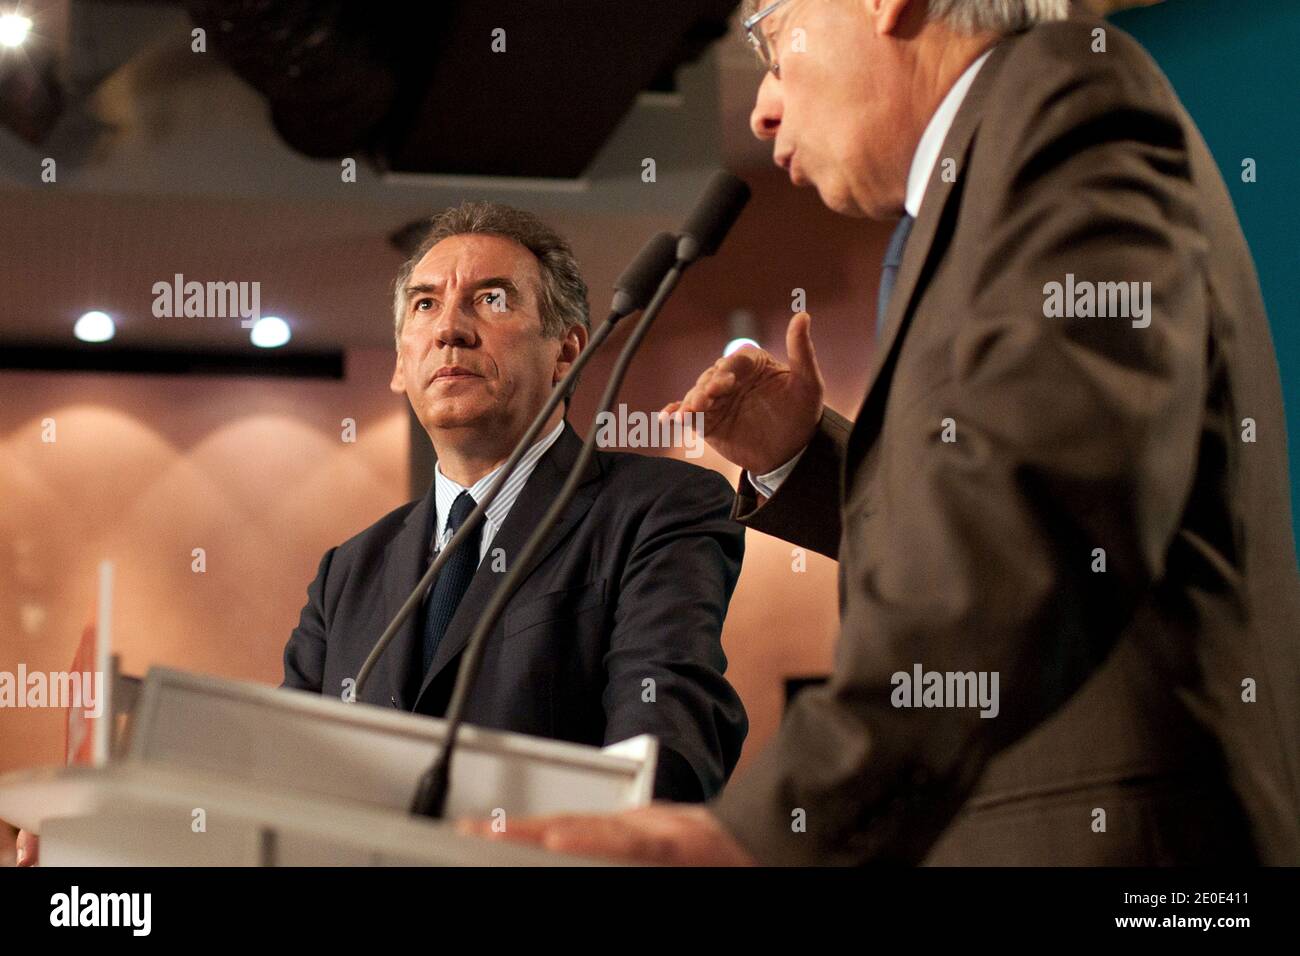 President of the MoDem centrist party and candidate for the 2012 French presidential election Francois Bayrou listens to Pierre Albertini during a campaign press conference at his headquarters, in Paris, France, on April 03, 2012. Photo by Stephane Lemouton/ABACAPRESS.COM. Stock Photo